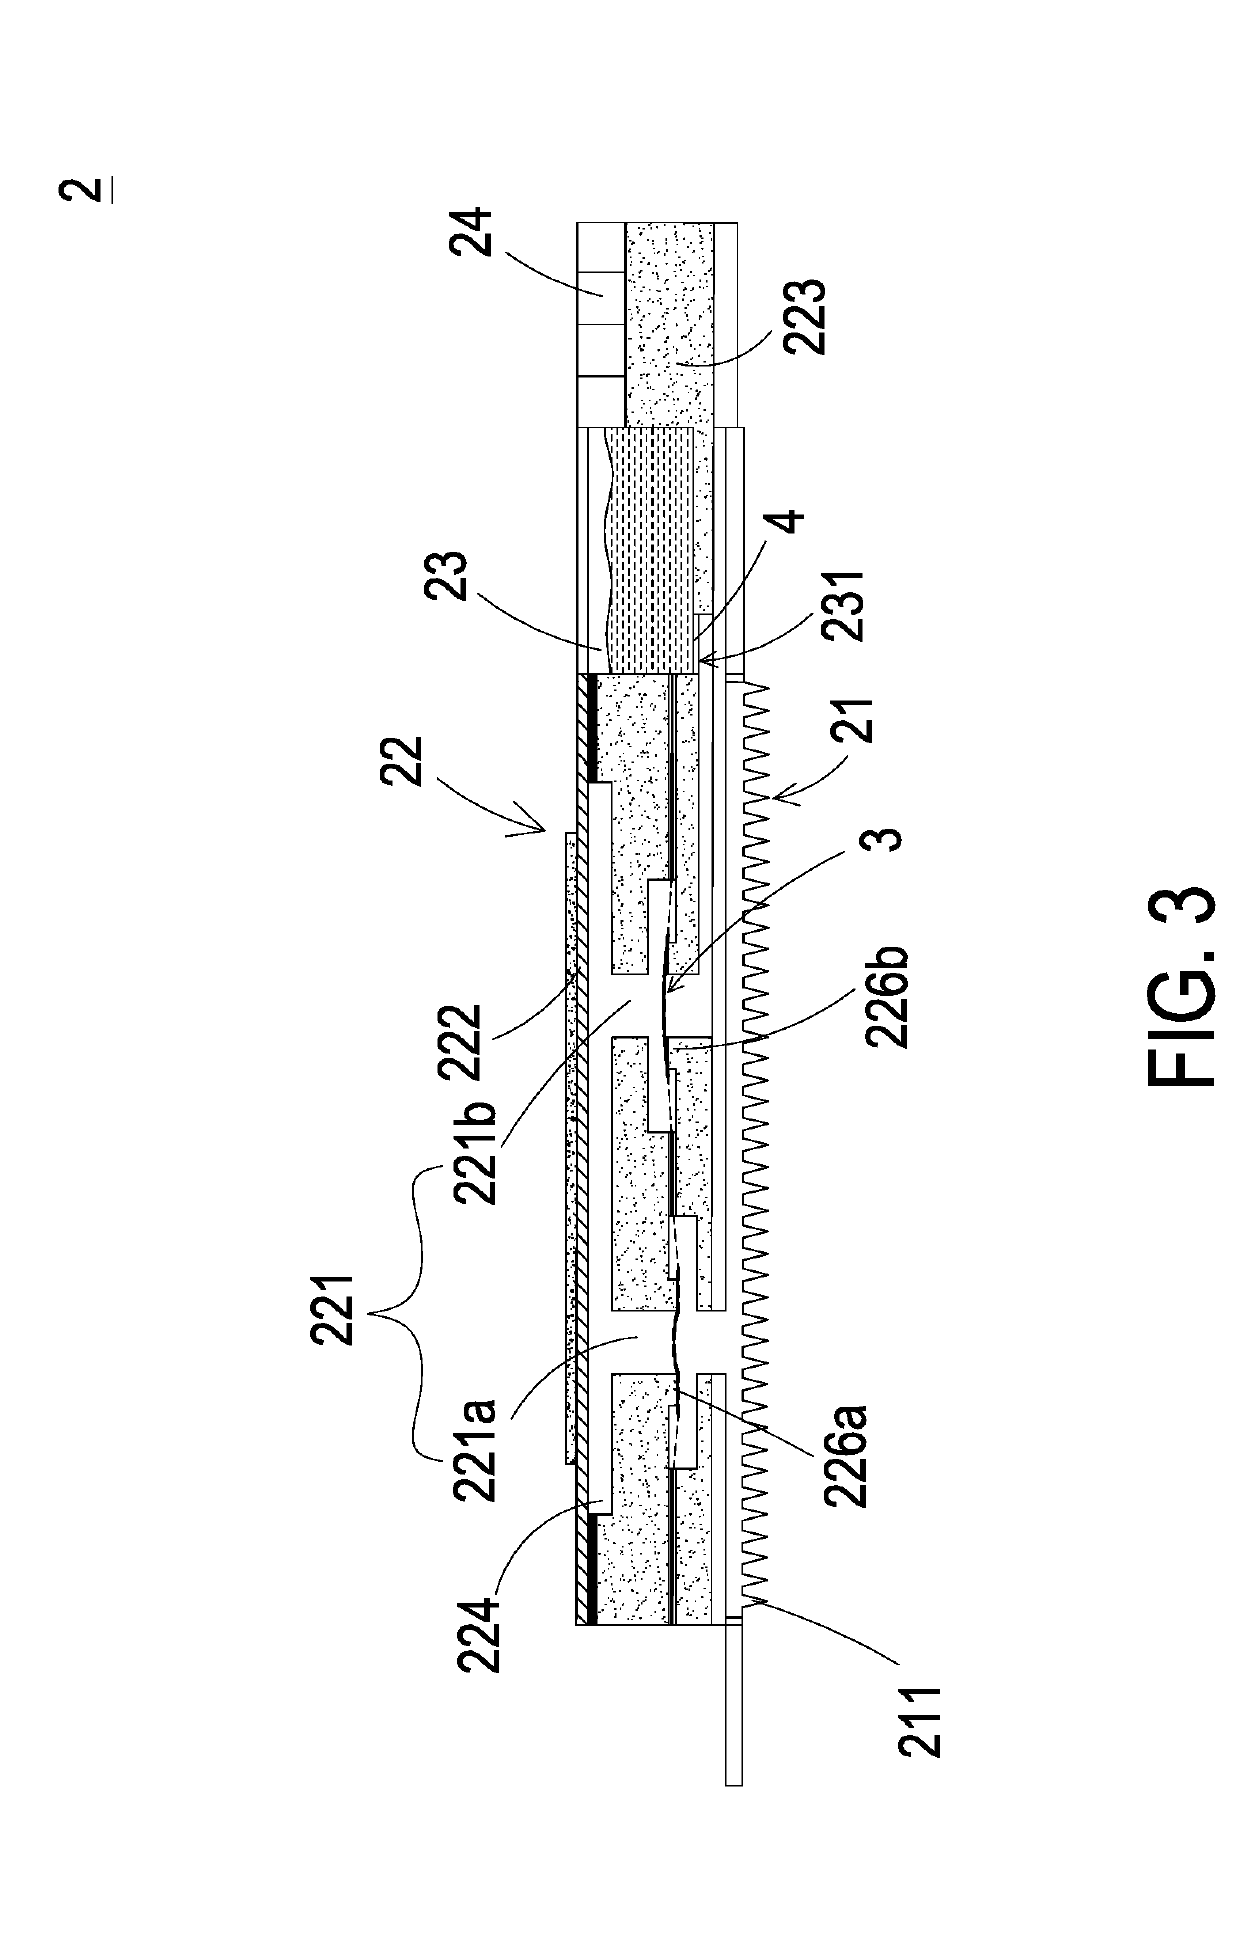 Blood glucose monitoring and controlling system